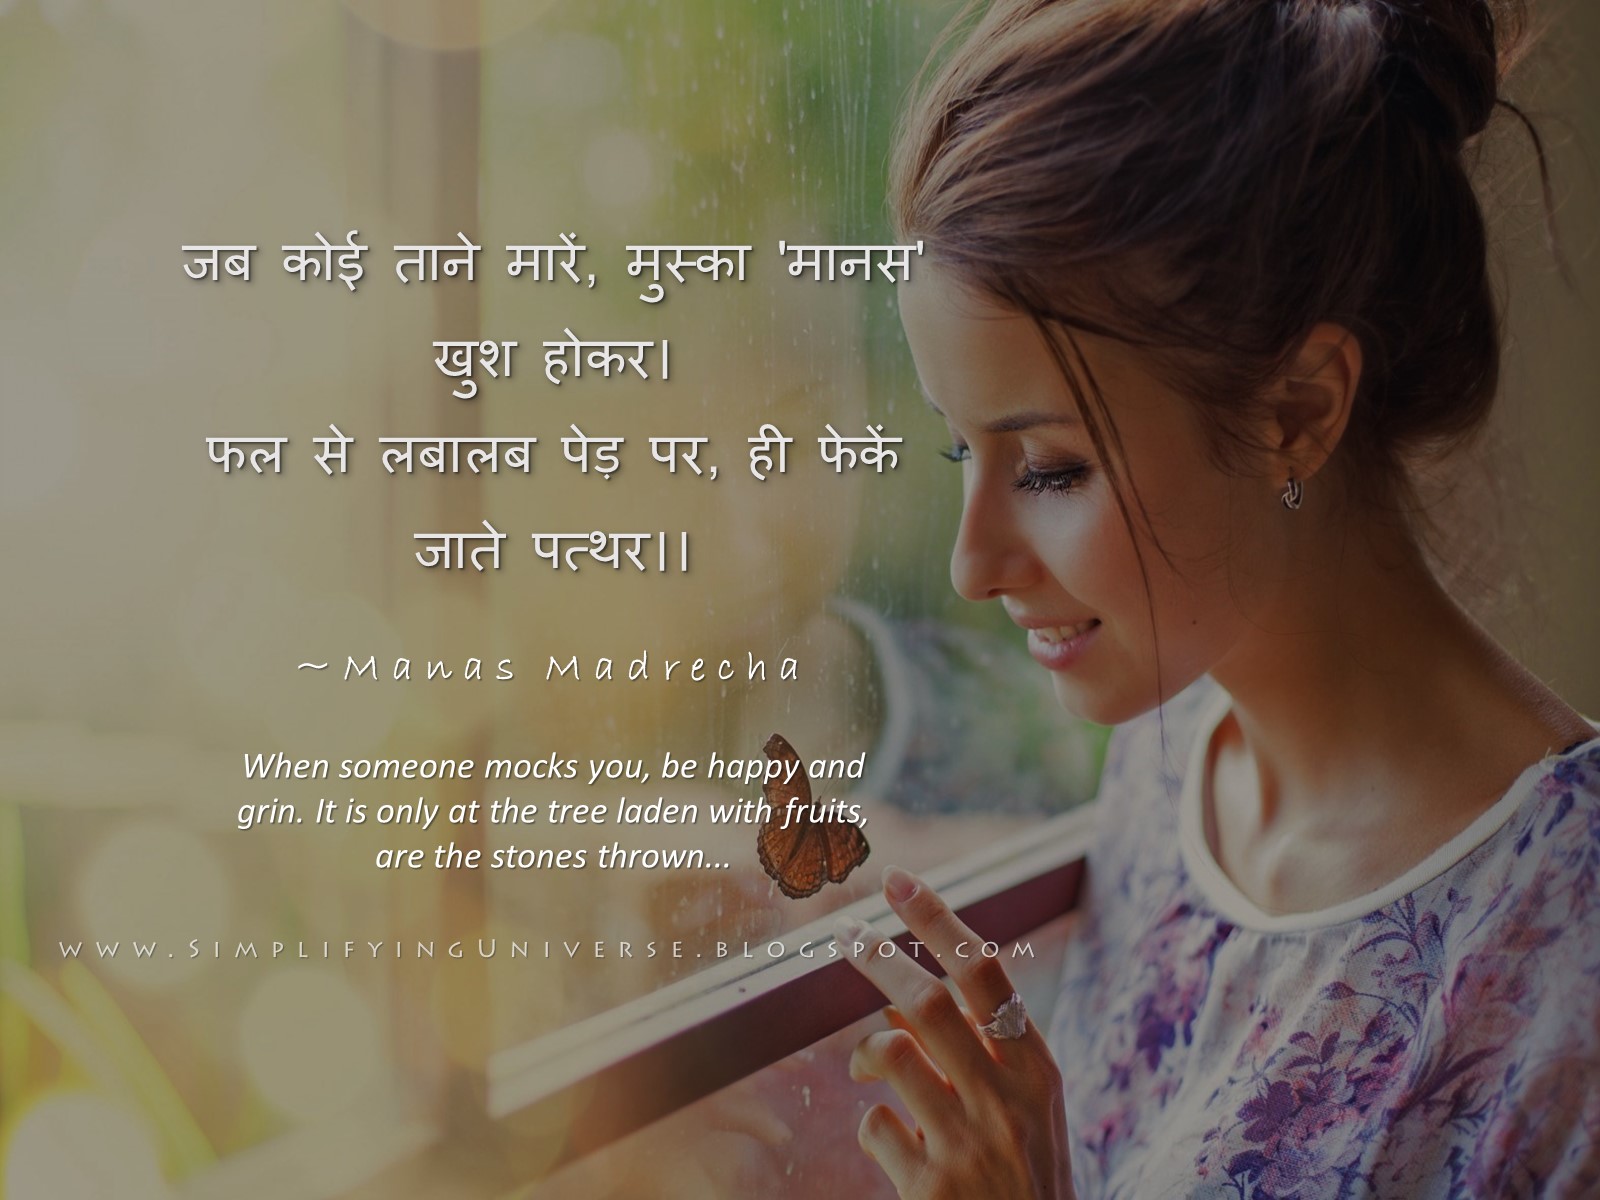 cute innocent woman playing with butterfly, woman window, girl in spring, manas madrecha, hindi poem on love criticism rumors, hindi quotes, simplifying universe, india mumbai blog, hindi self-help poet